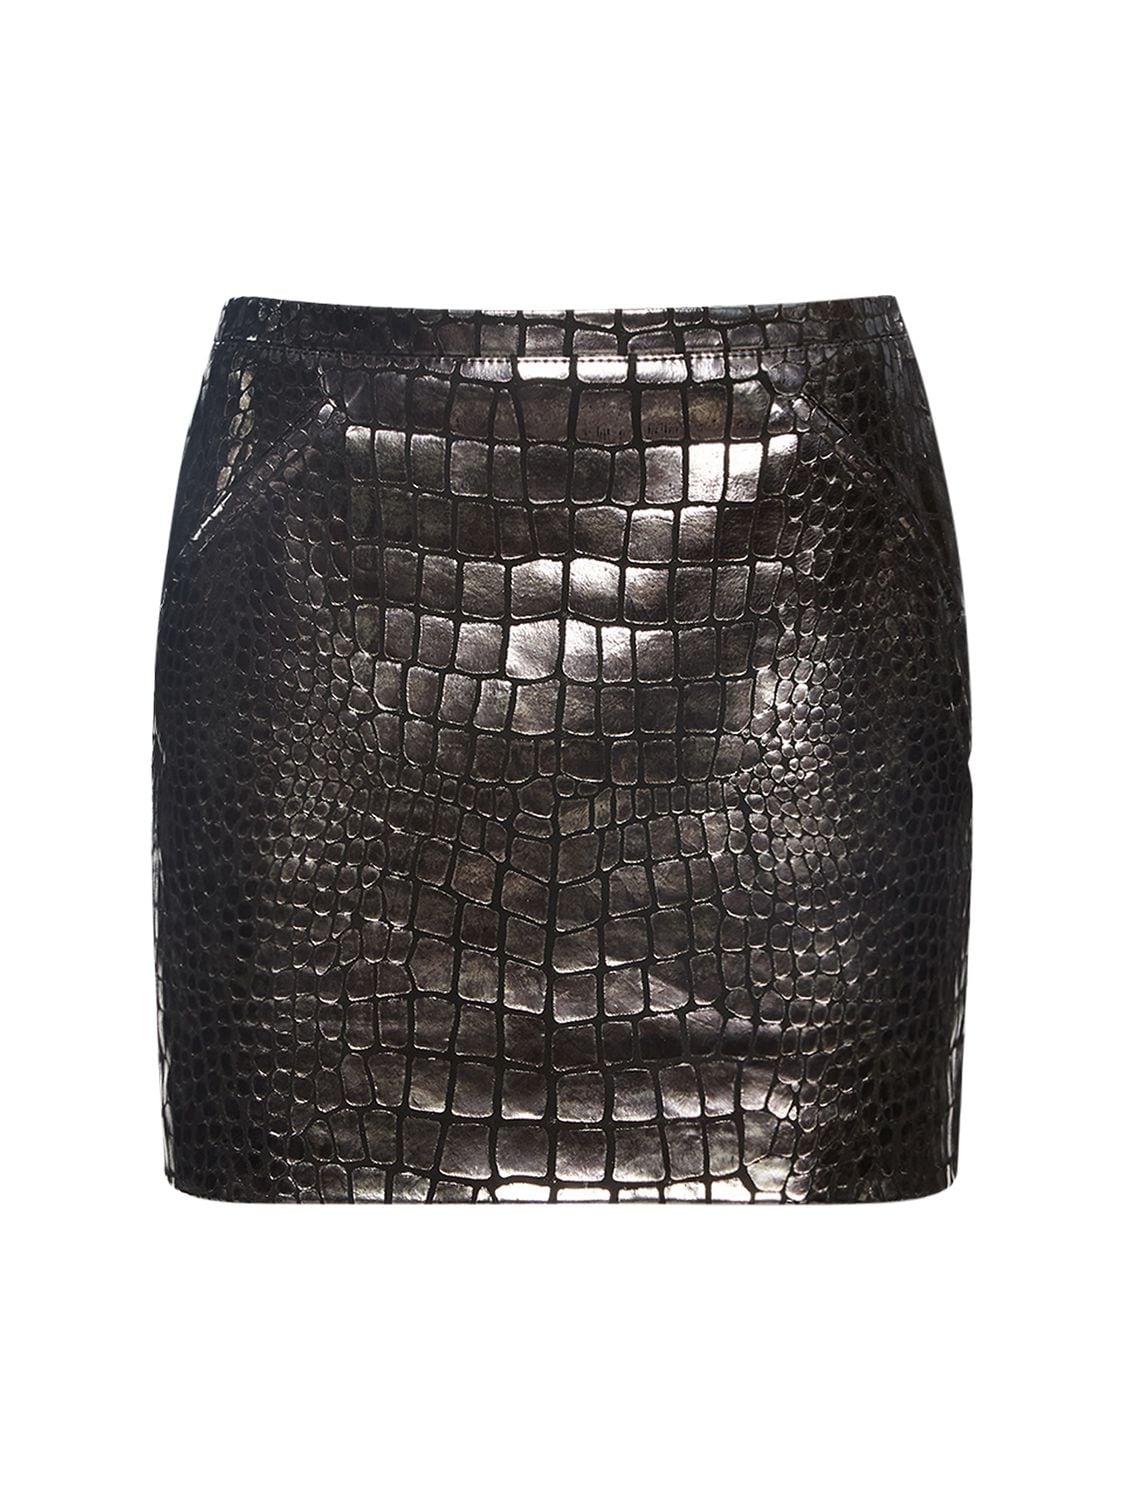 Image of Croc Embossed Laminated Leather Skirt